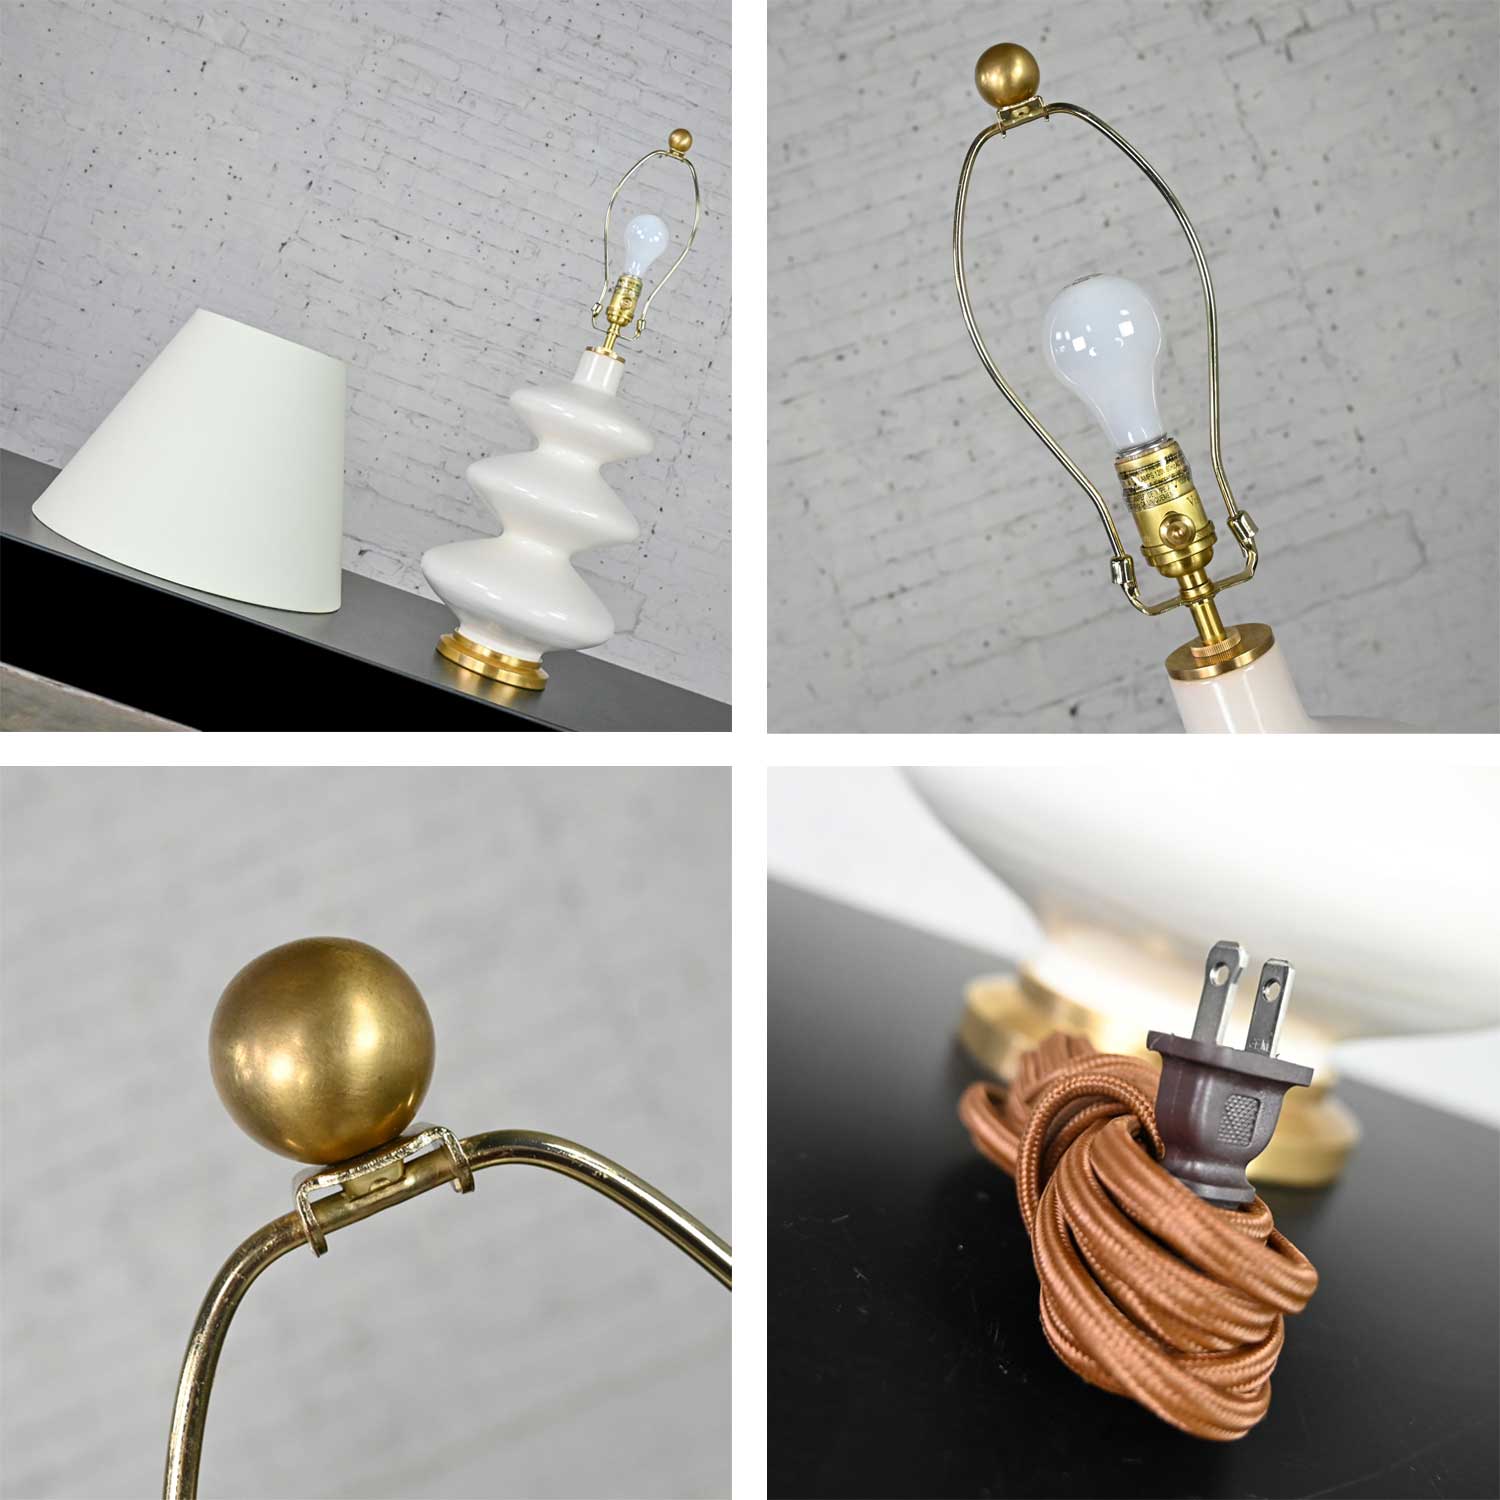 Smith Ivory Table Lamp Brass Details by Christopher Spitzmiller for Visual Comfort